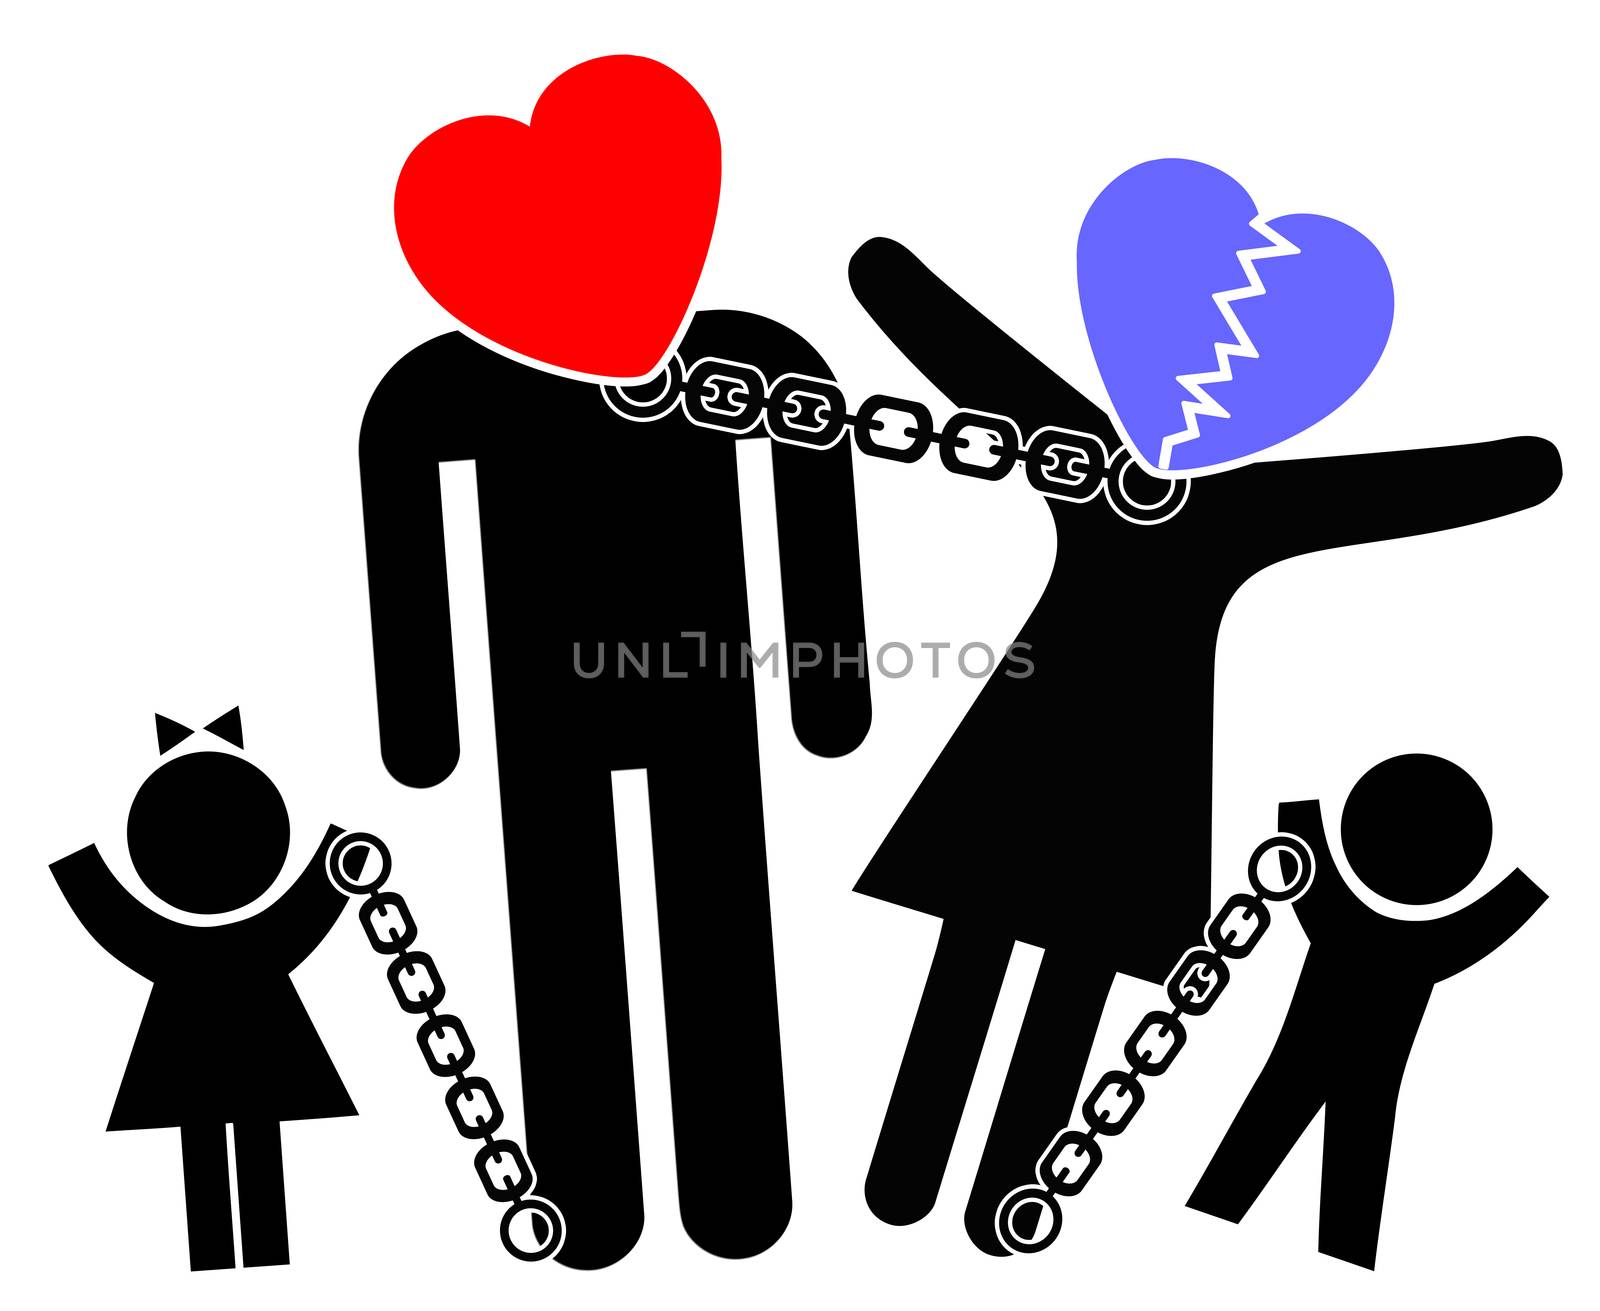 Concept sign of parents on the verge of divorce or separation affecting children